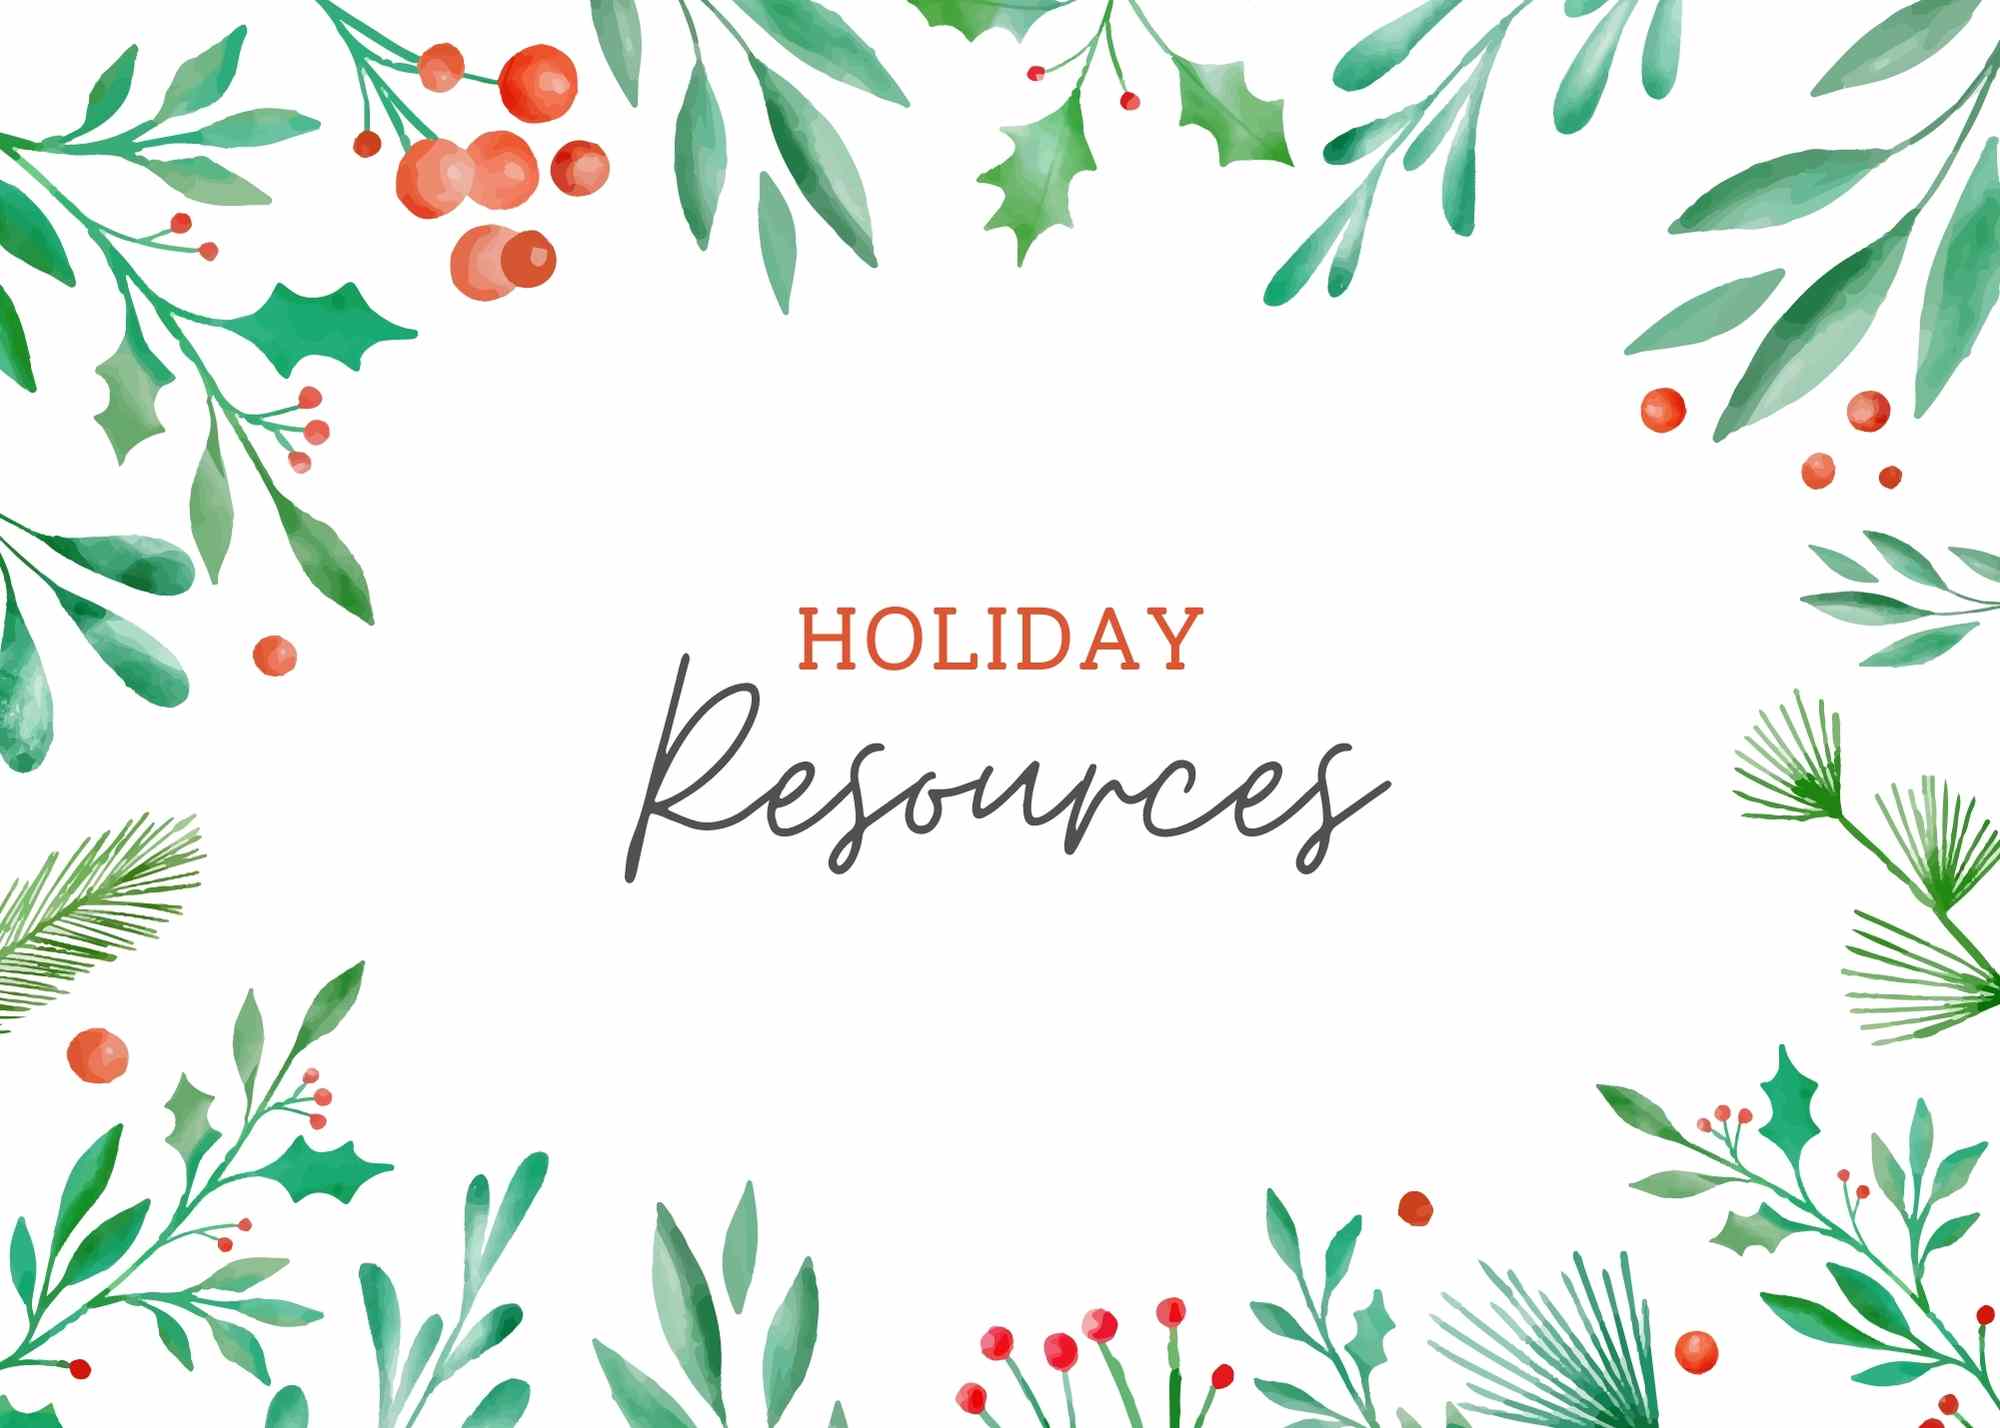 Holiday Resources for Consumers